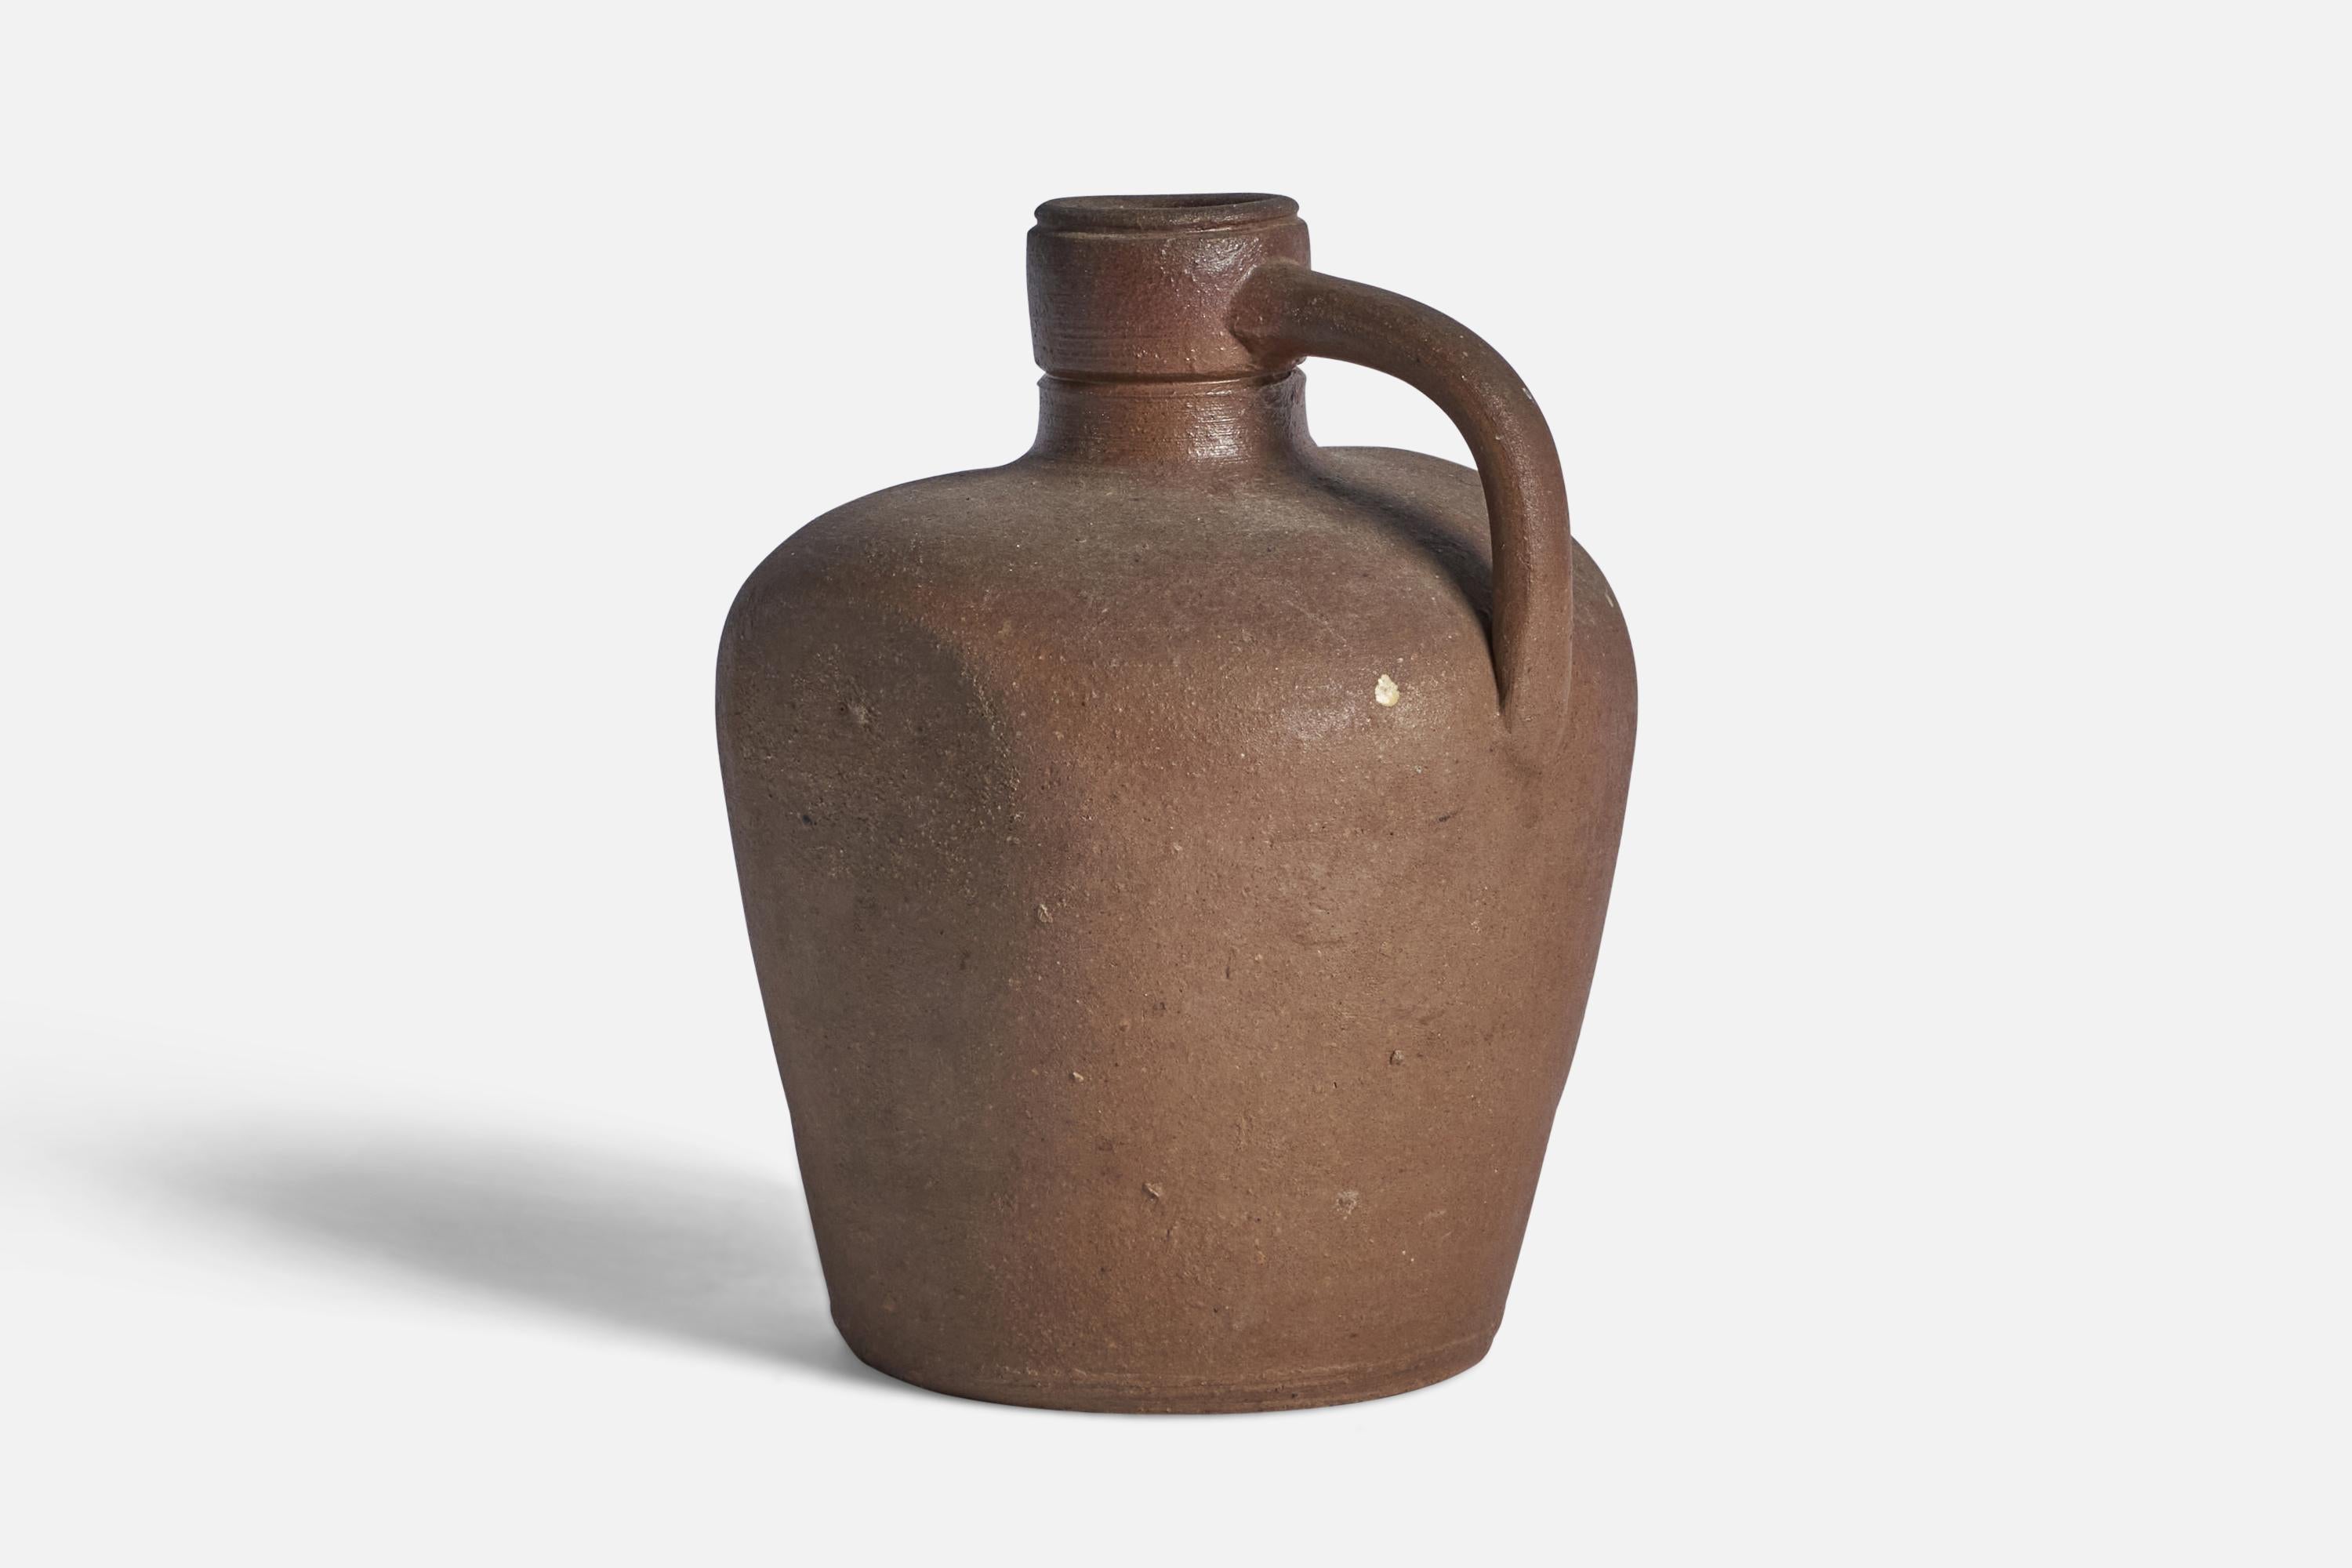 An unglazed brown stoneware pitcher designed and produced by Höganäs Keramik, Sweden, 1930s.